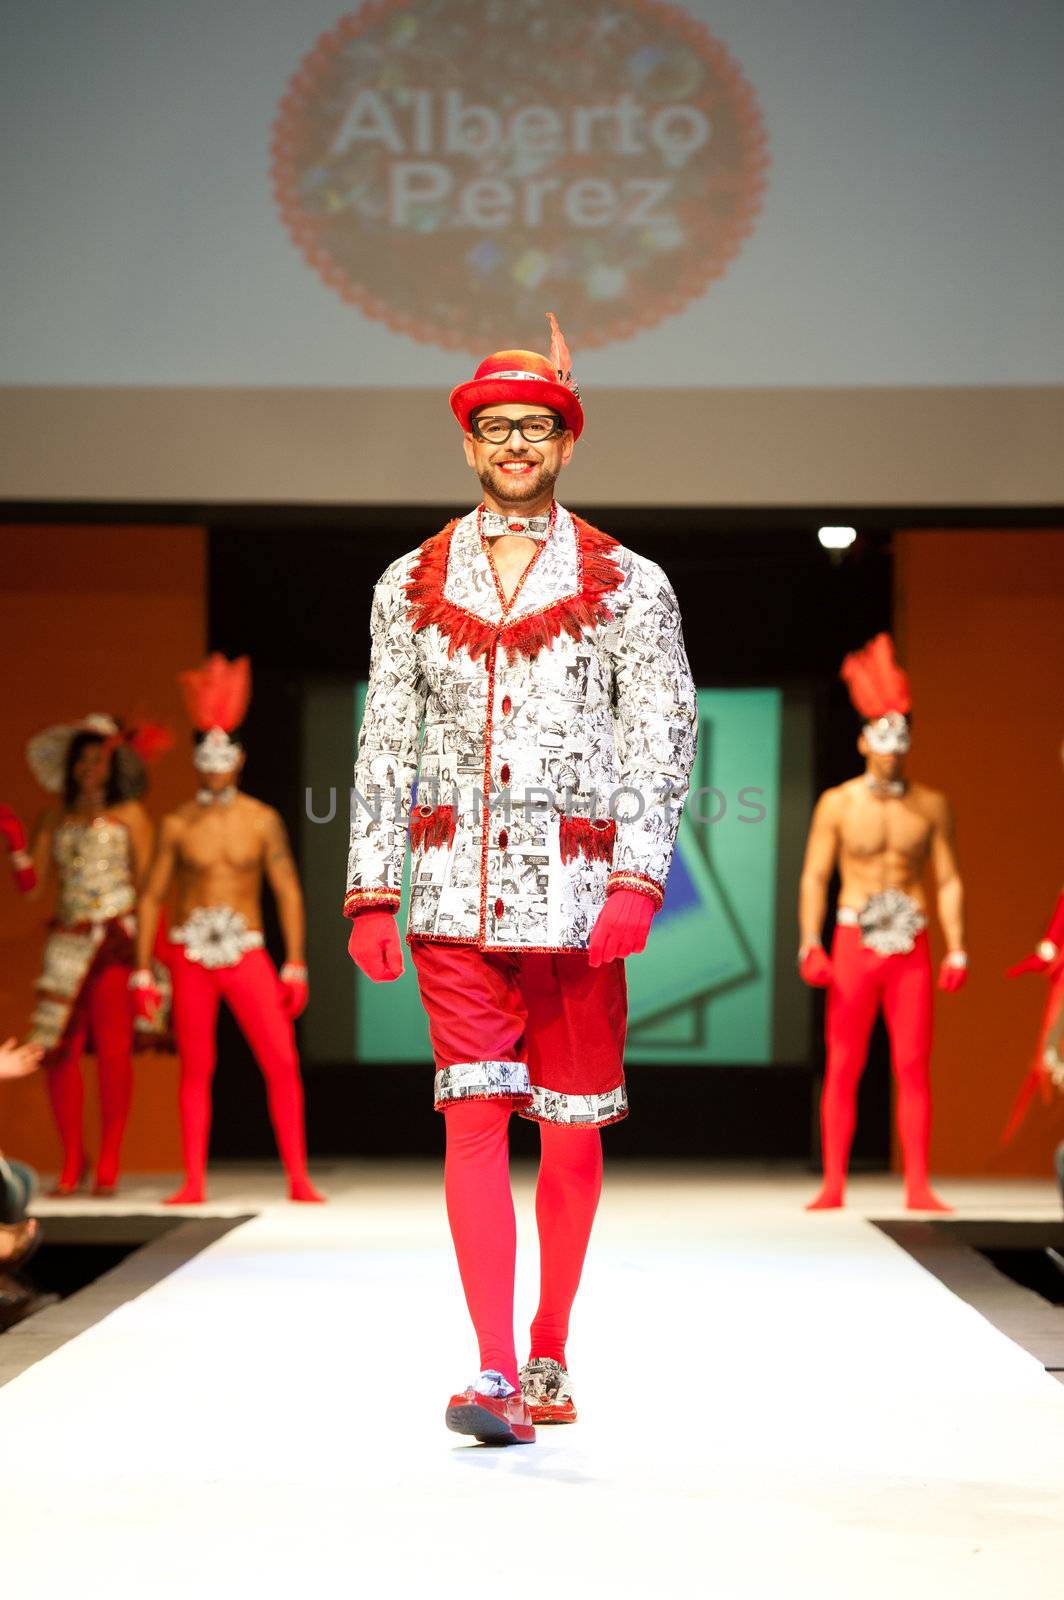 CANARY ISLANDS - 29 OCTOBER: Model on the catwalk wearing carnival costume from designer Alberto Perez during Carnival Fashion Week October 29, 2011 in Canary Islands, Spain